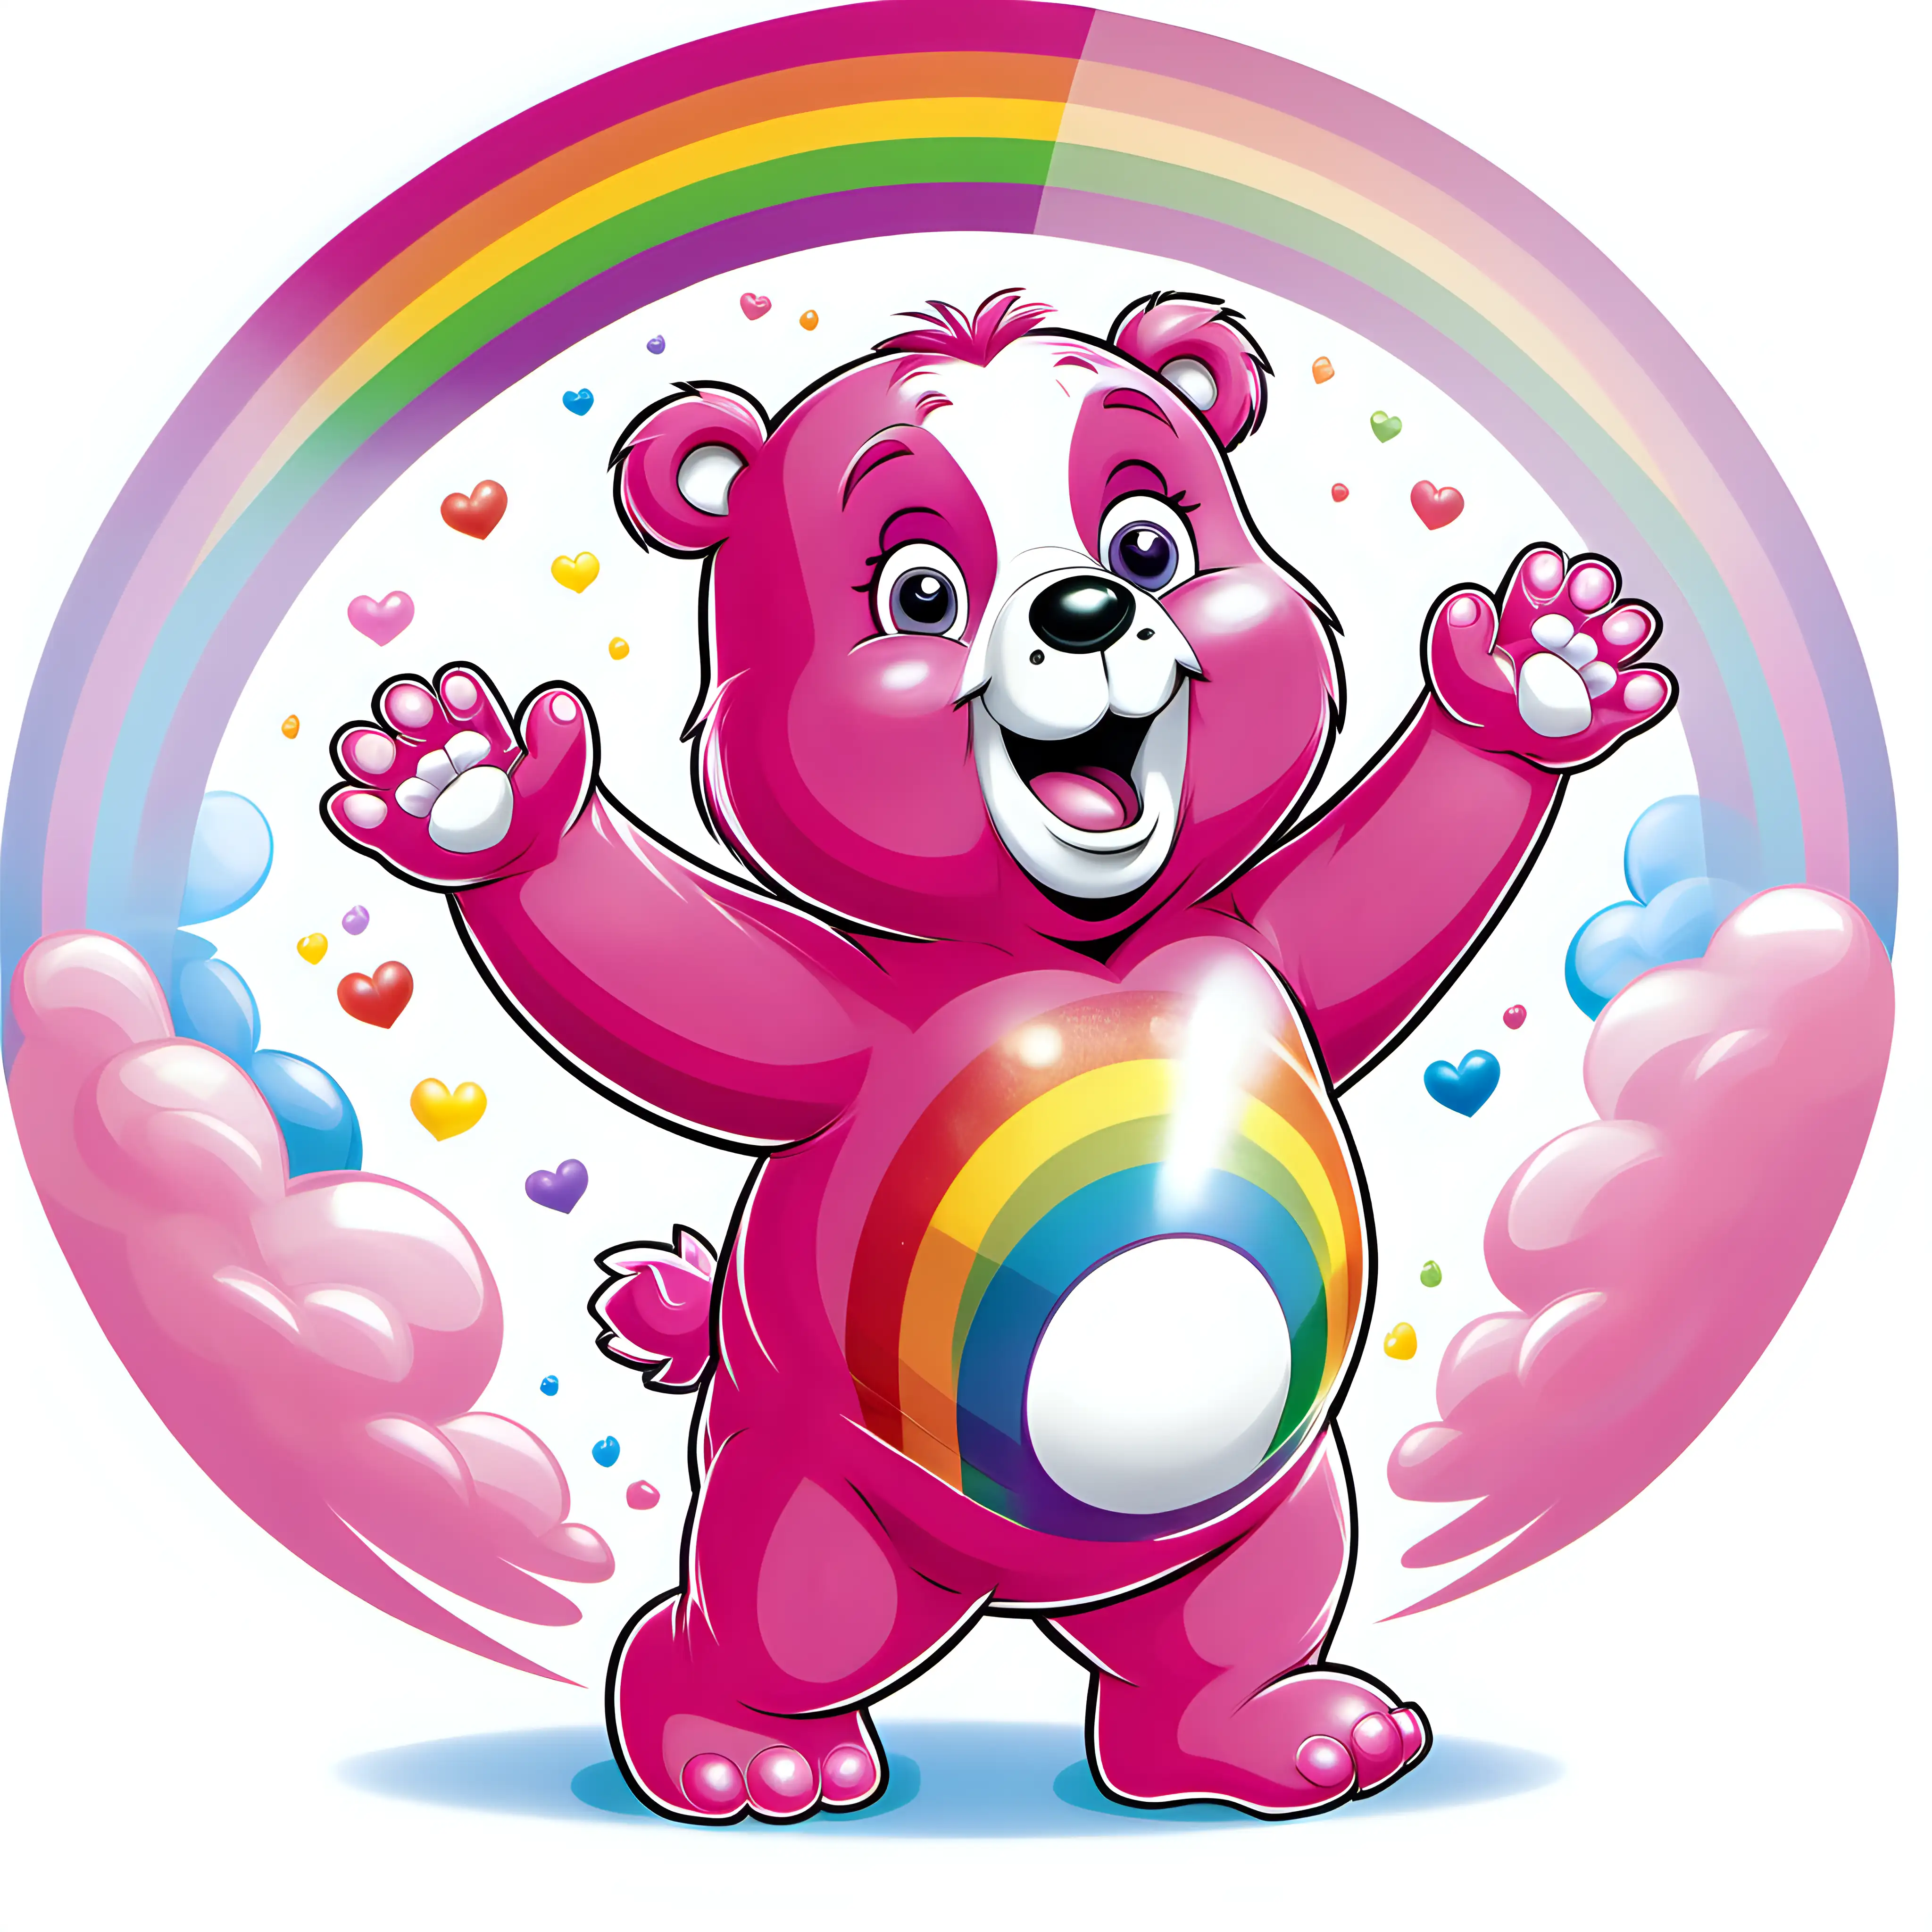 Create a high resolution movie cartoon character illustration of pink cheer bear from the care bears with her hands in the air waving  white belly with a rainbow in the middle of the belly, all set on a white background

